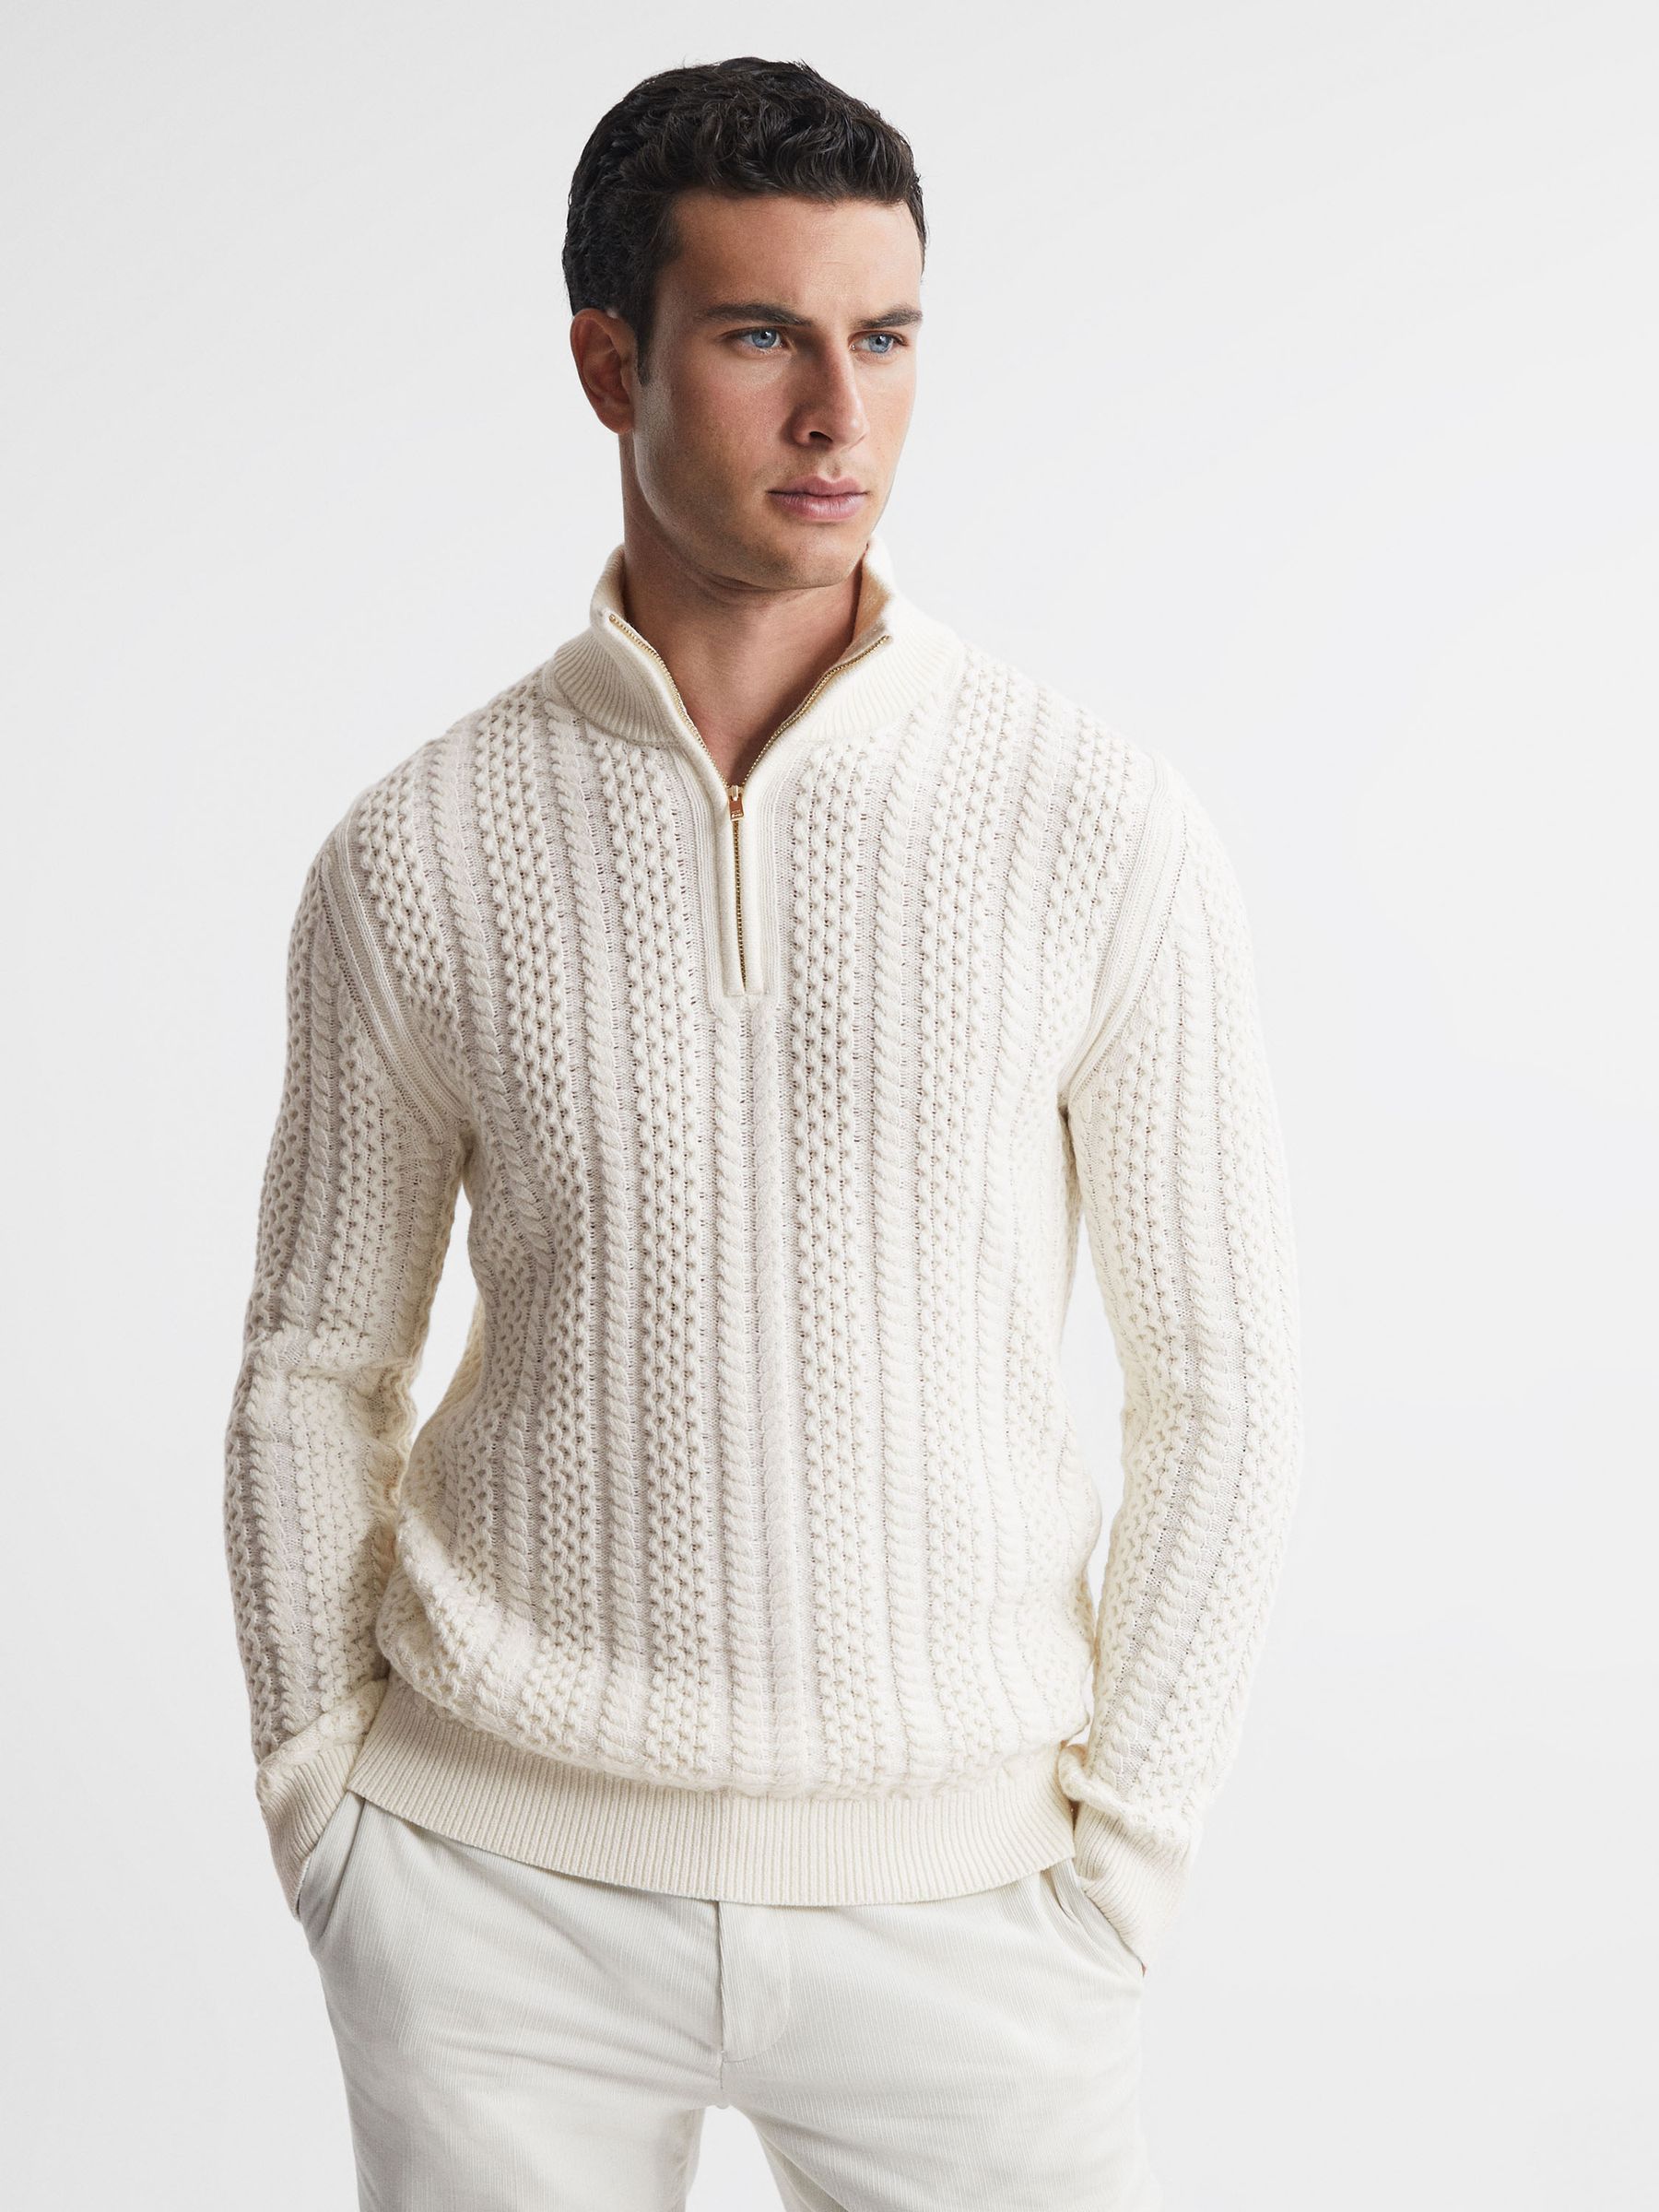 Reiss Bantham Cable Knit Half-Zip Funnel Neck Jumper | REISS USA